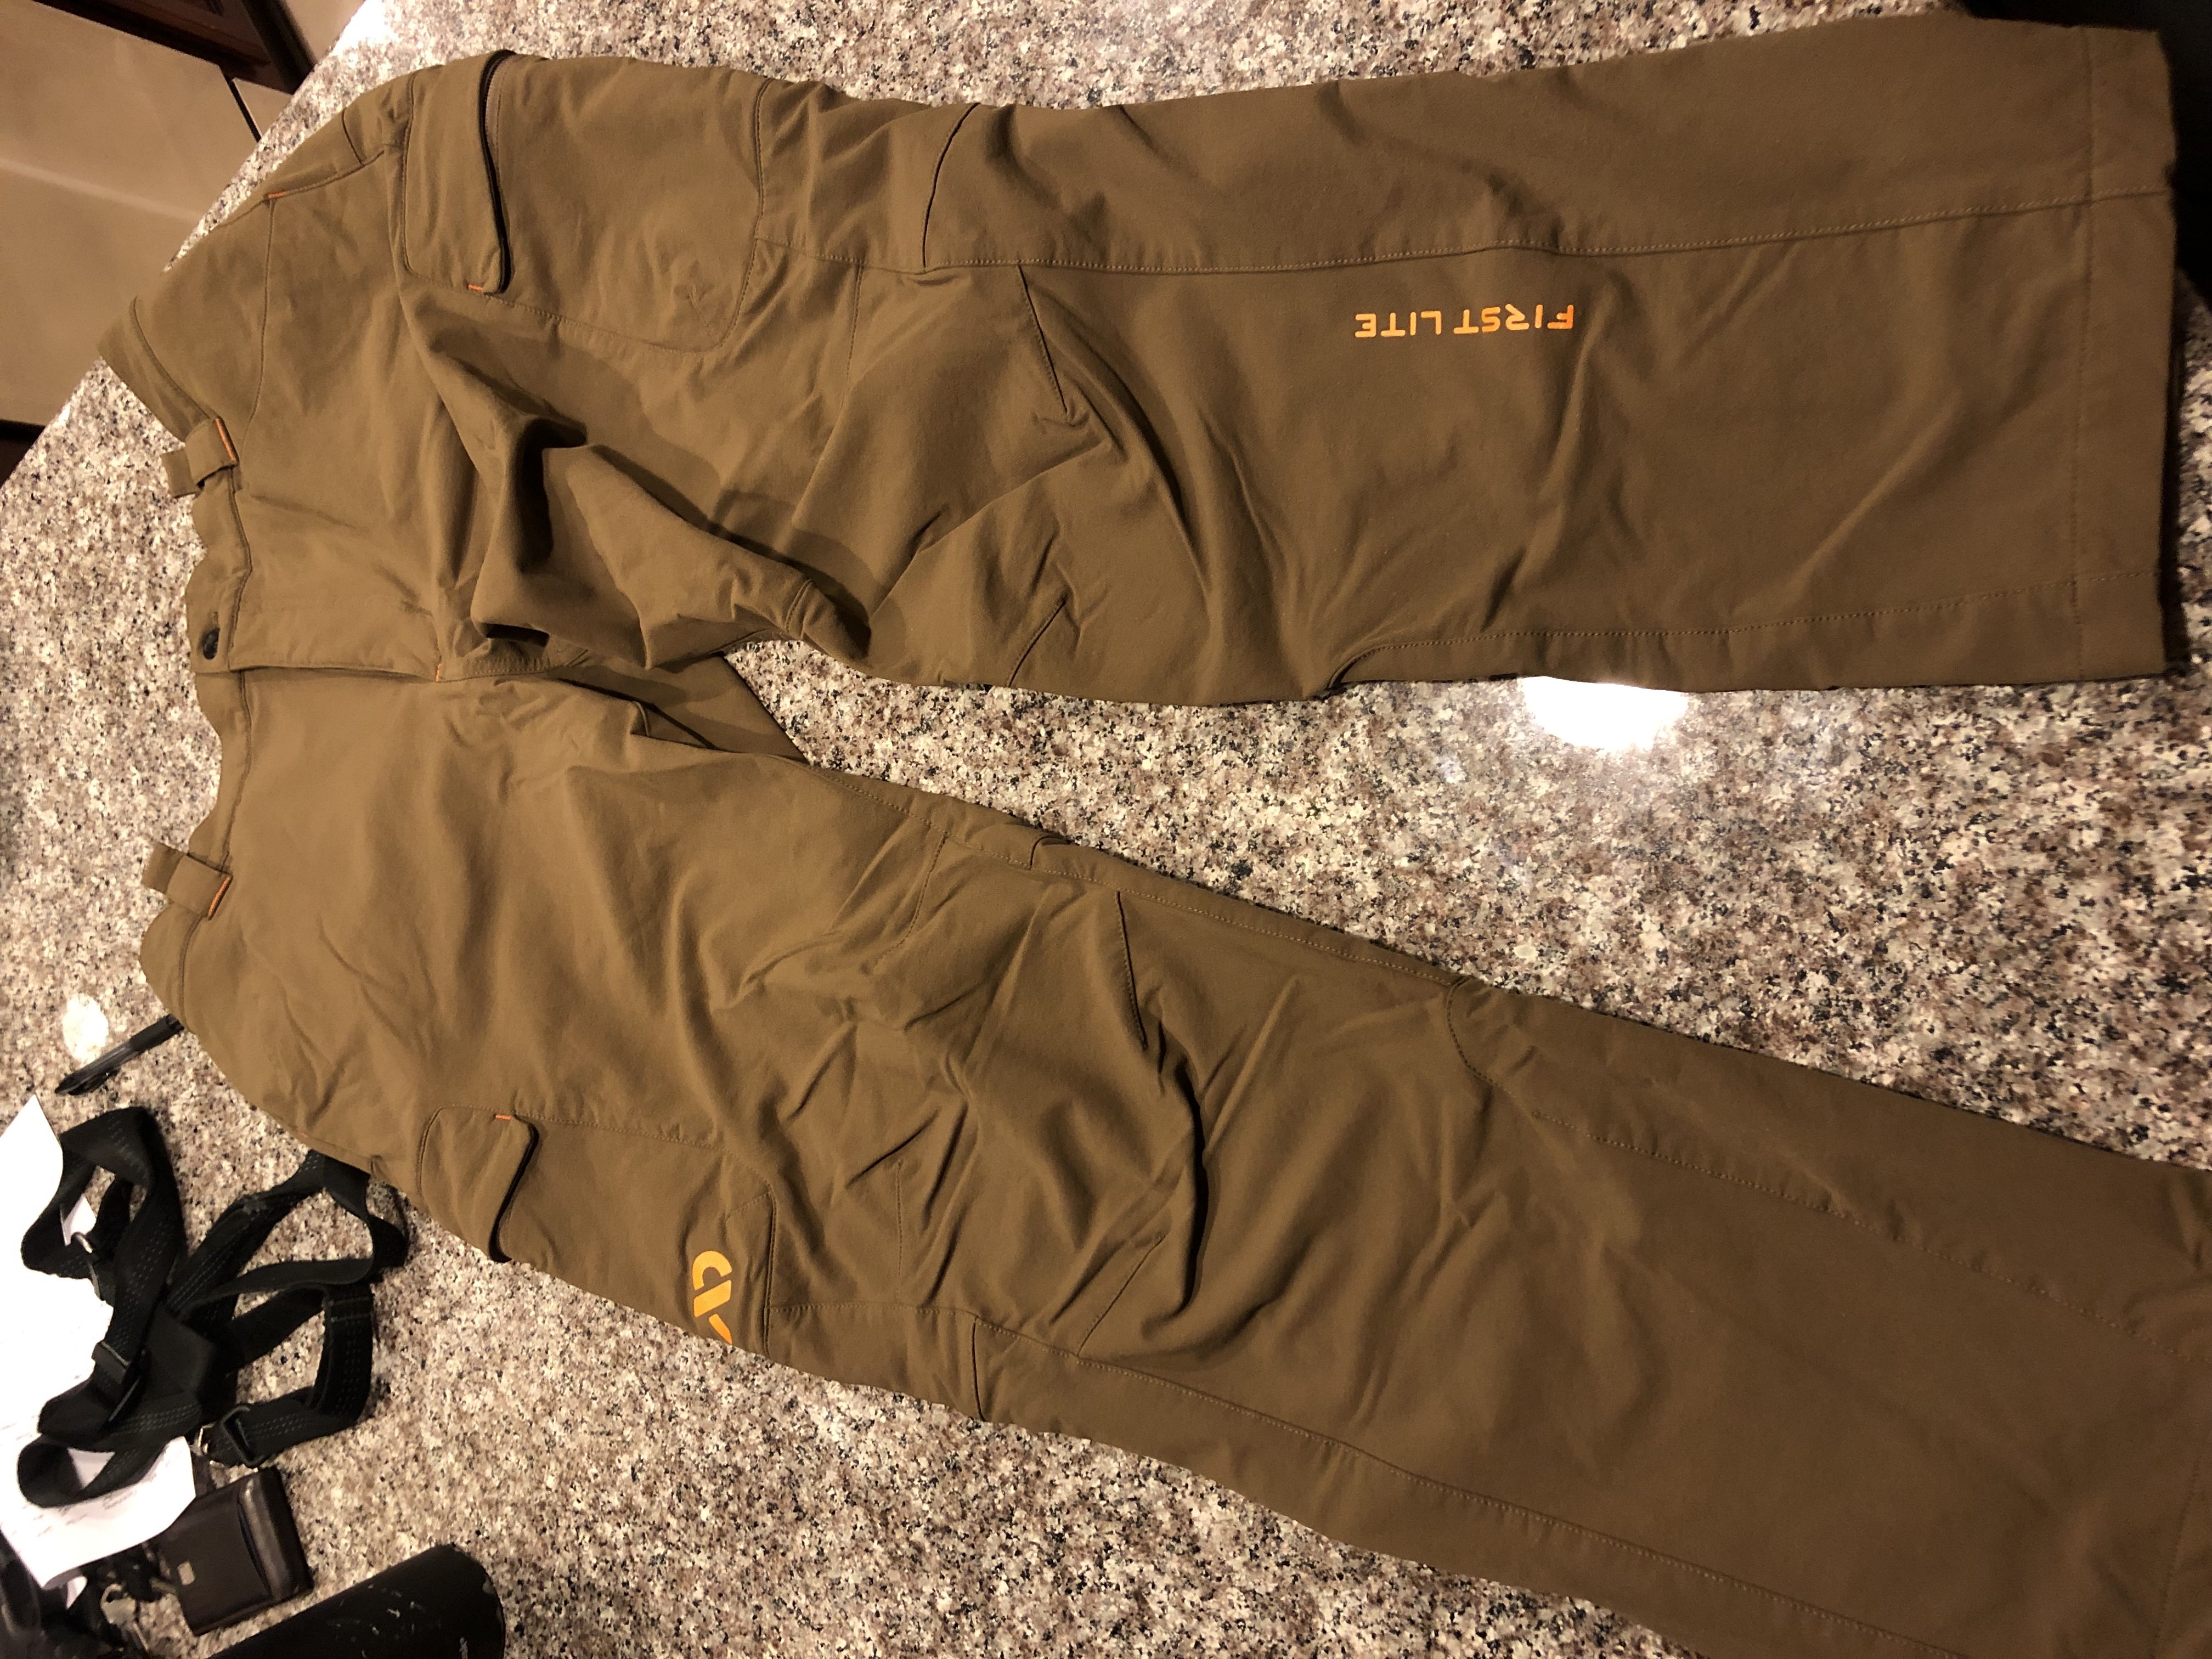 $100 Firstlite Corrugate Guide Pants Dry Earth L - Classified Ads ...